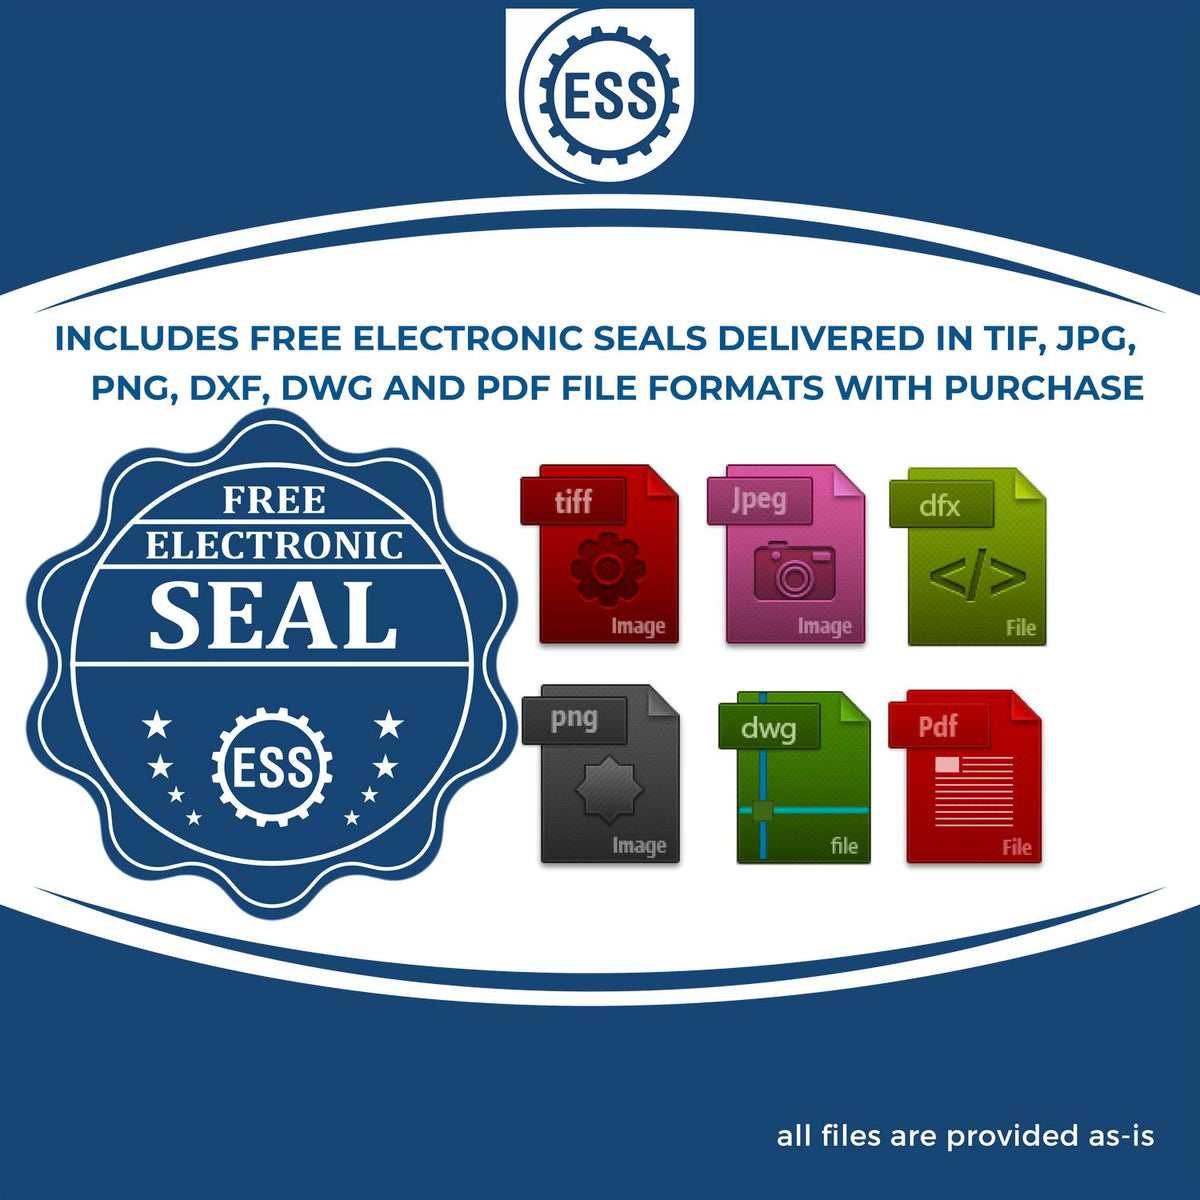 An infographic for the free electronic seal for the Self-Inking Vermont PE Stamp illustrating the different file type icons such as DXF, DWG, TIF, JPG and PNG.